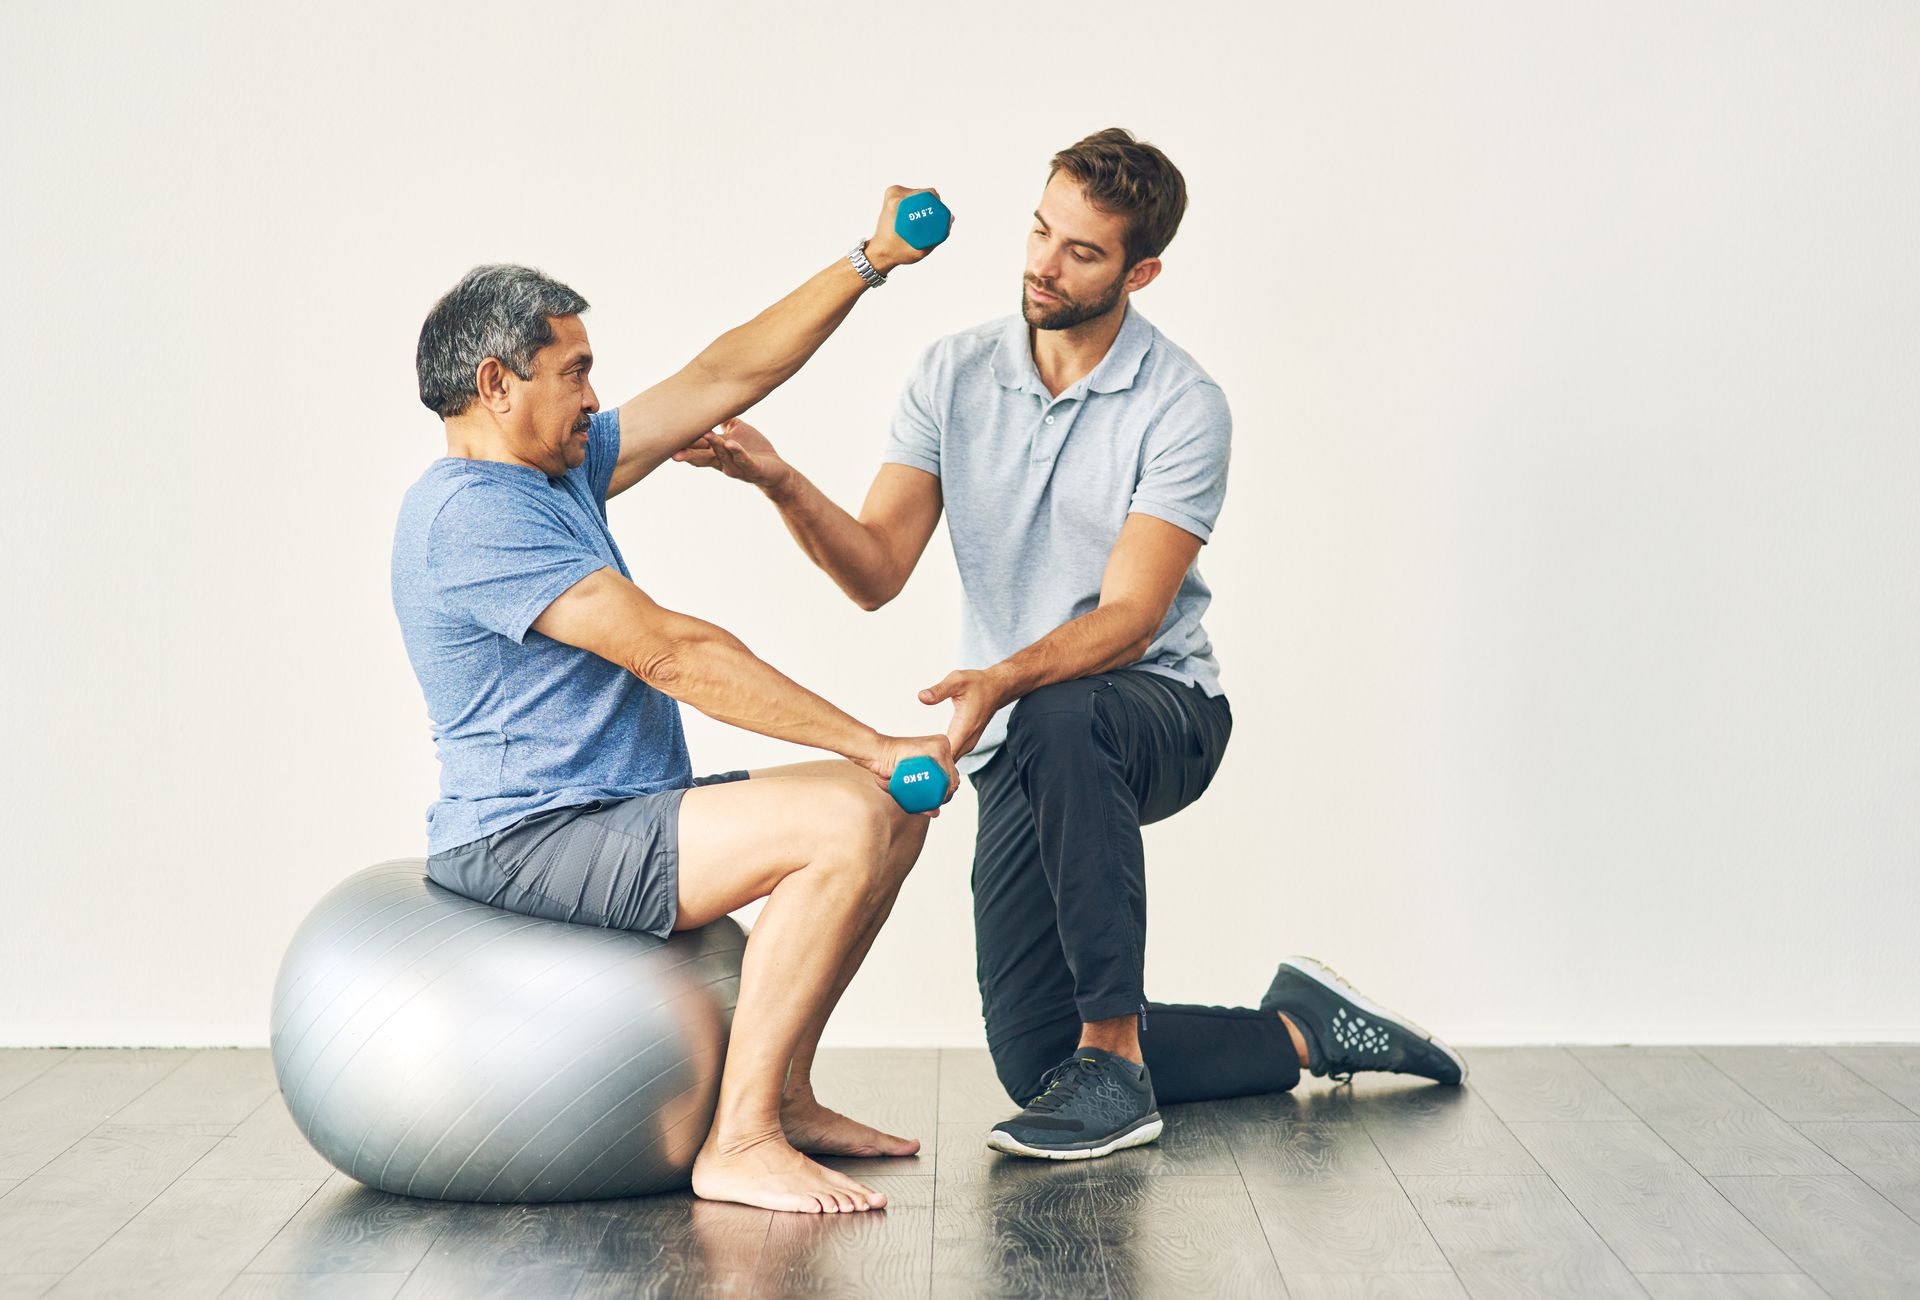 a man sits on an exercise ball while another man holds dumbbells